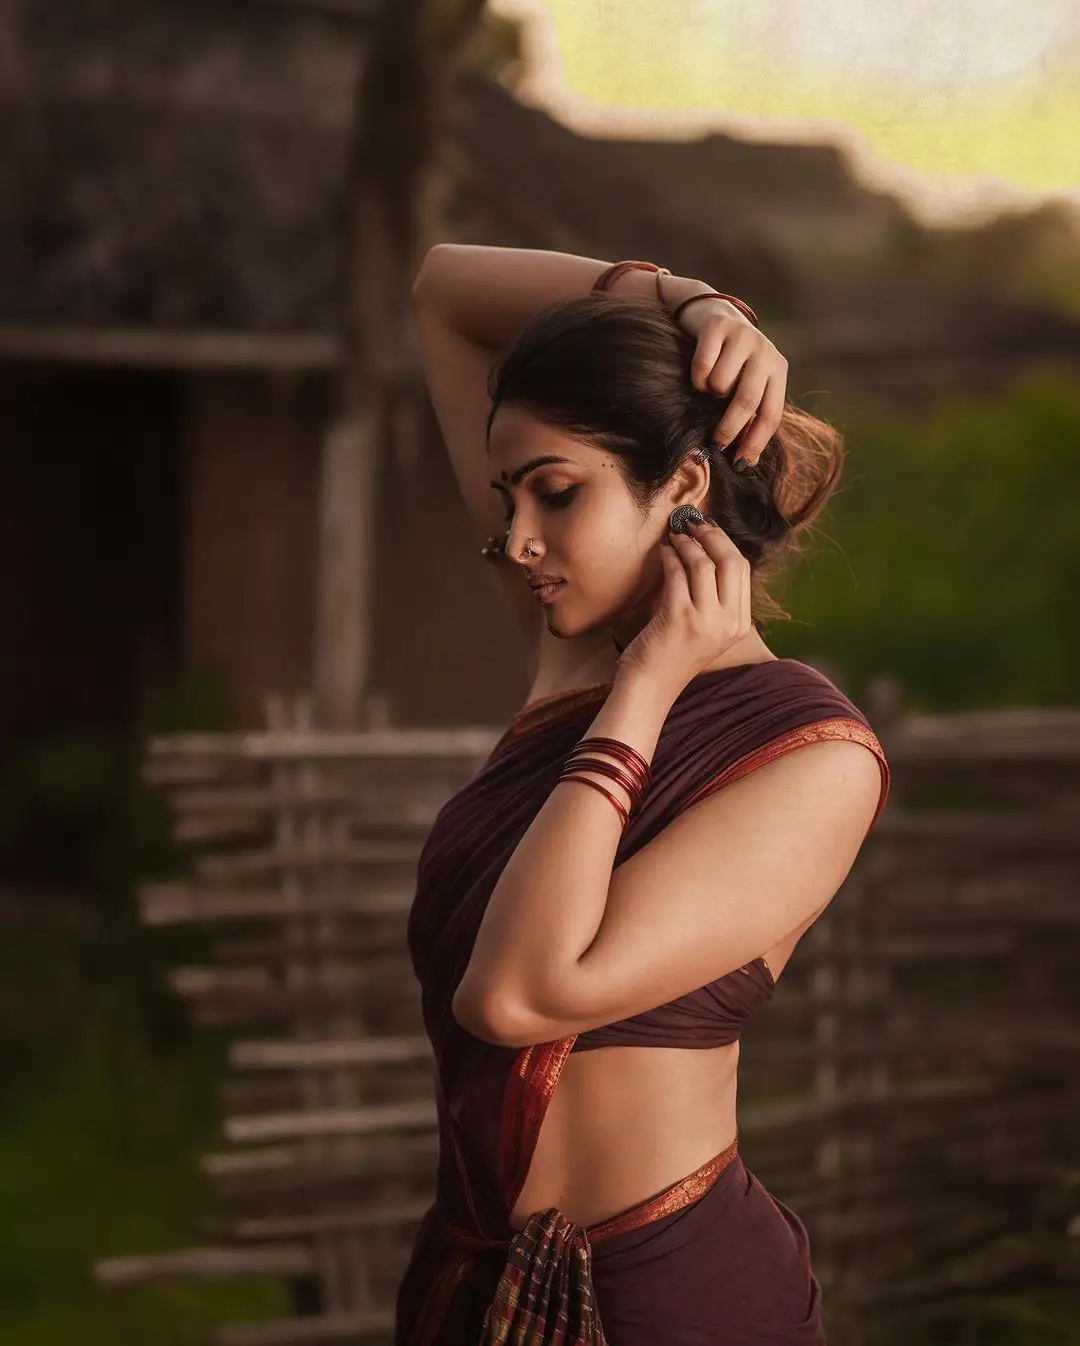 Divi Vadthya Stunning Looks in Saree looks like a Beautiful Village Girl 